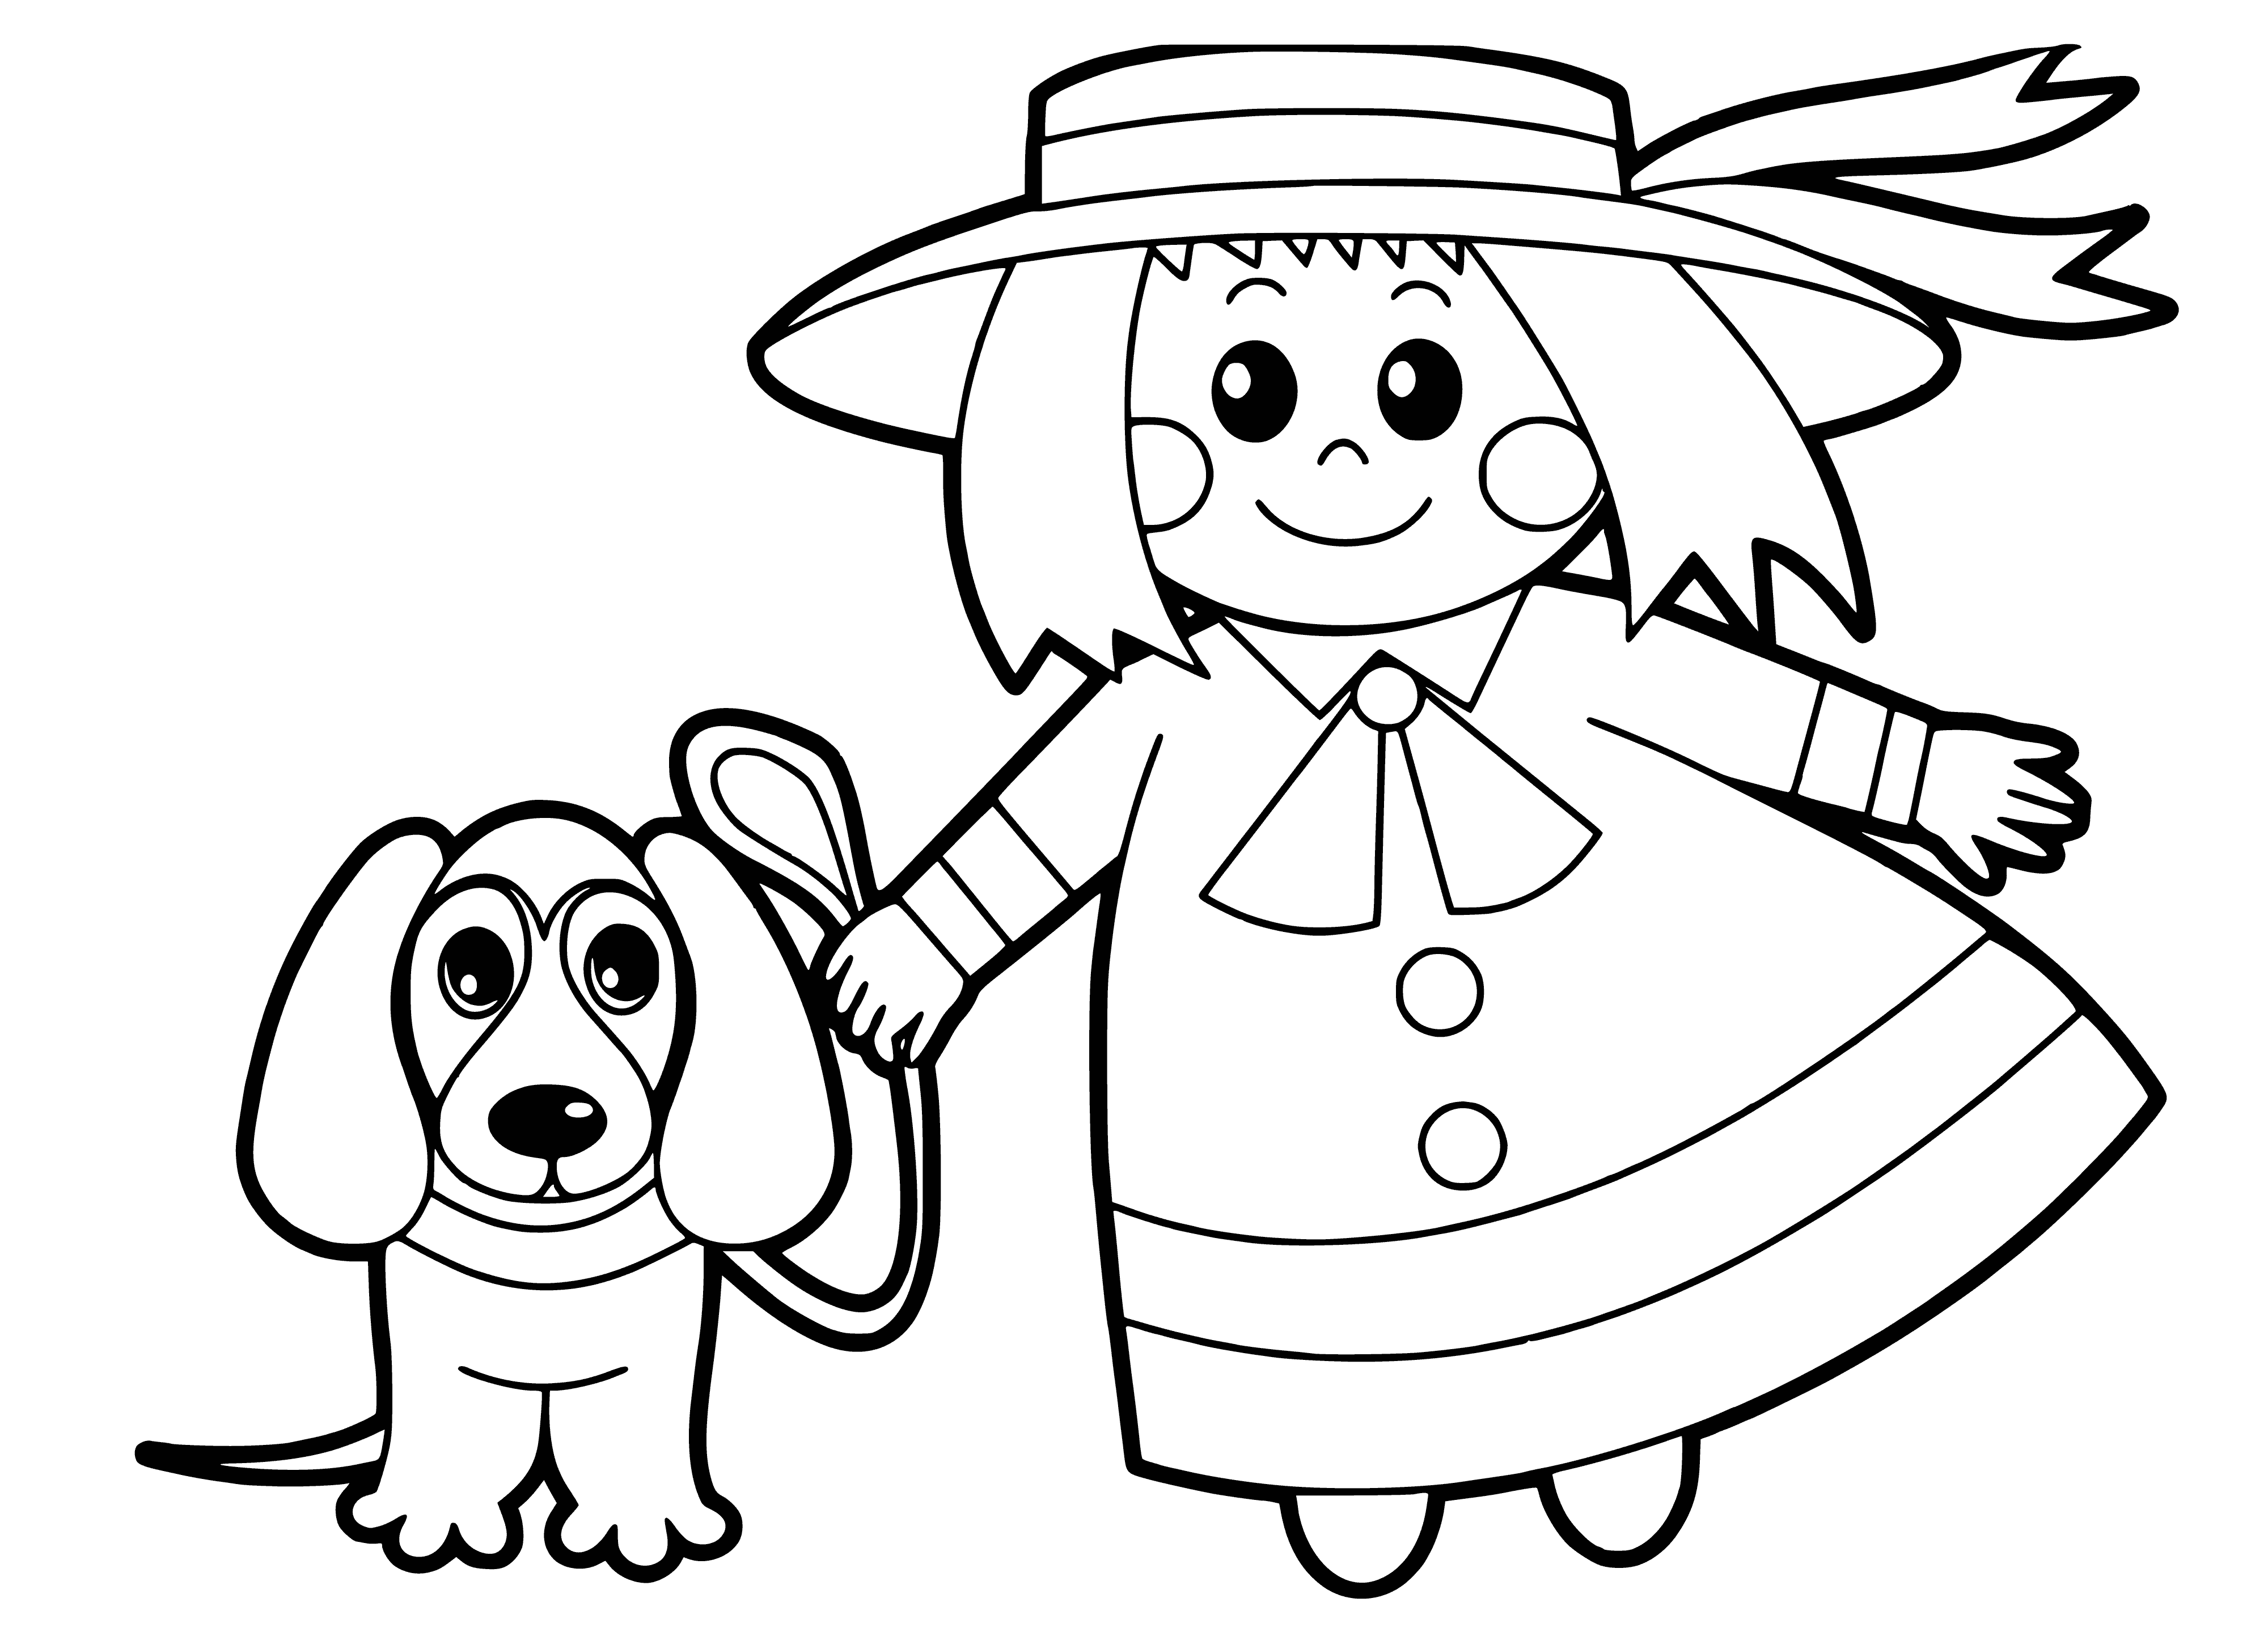 coloring page: Girl & dog playing together, having a great time; laughter & leaps fill the air.